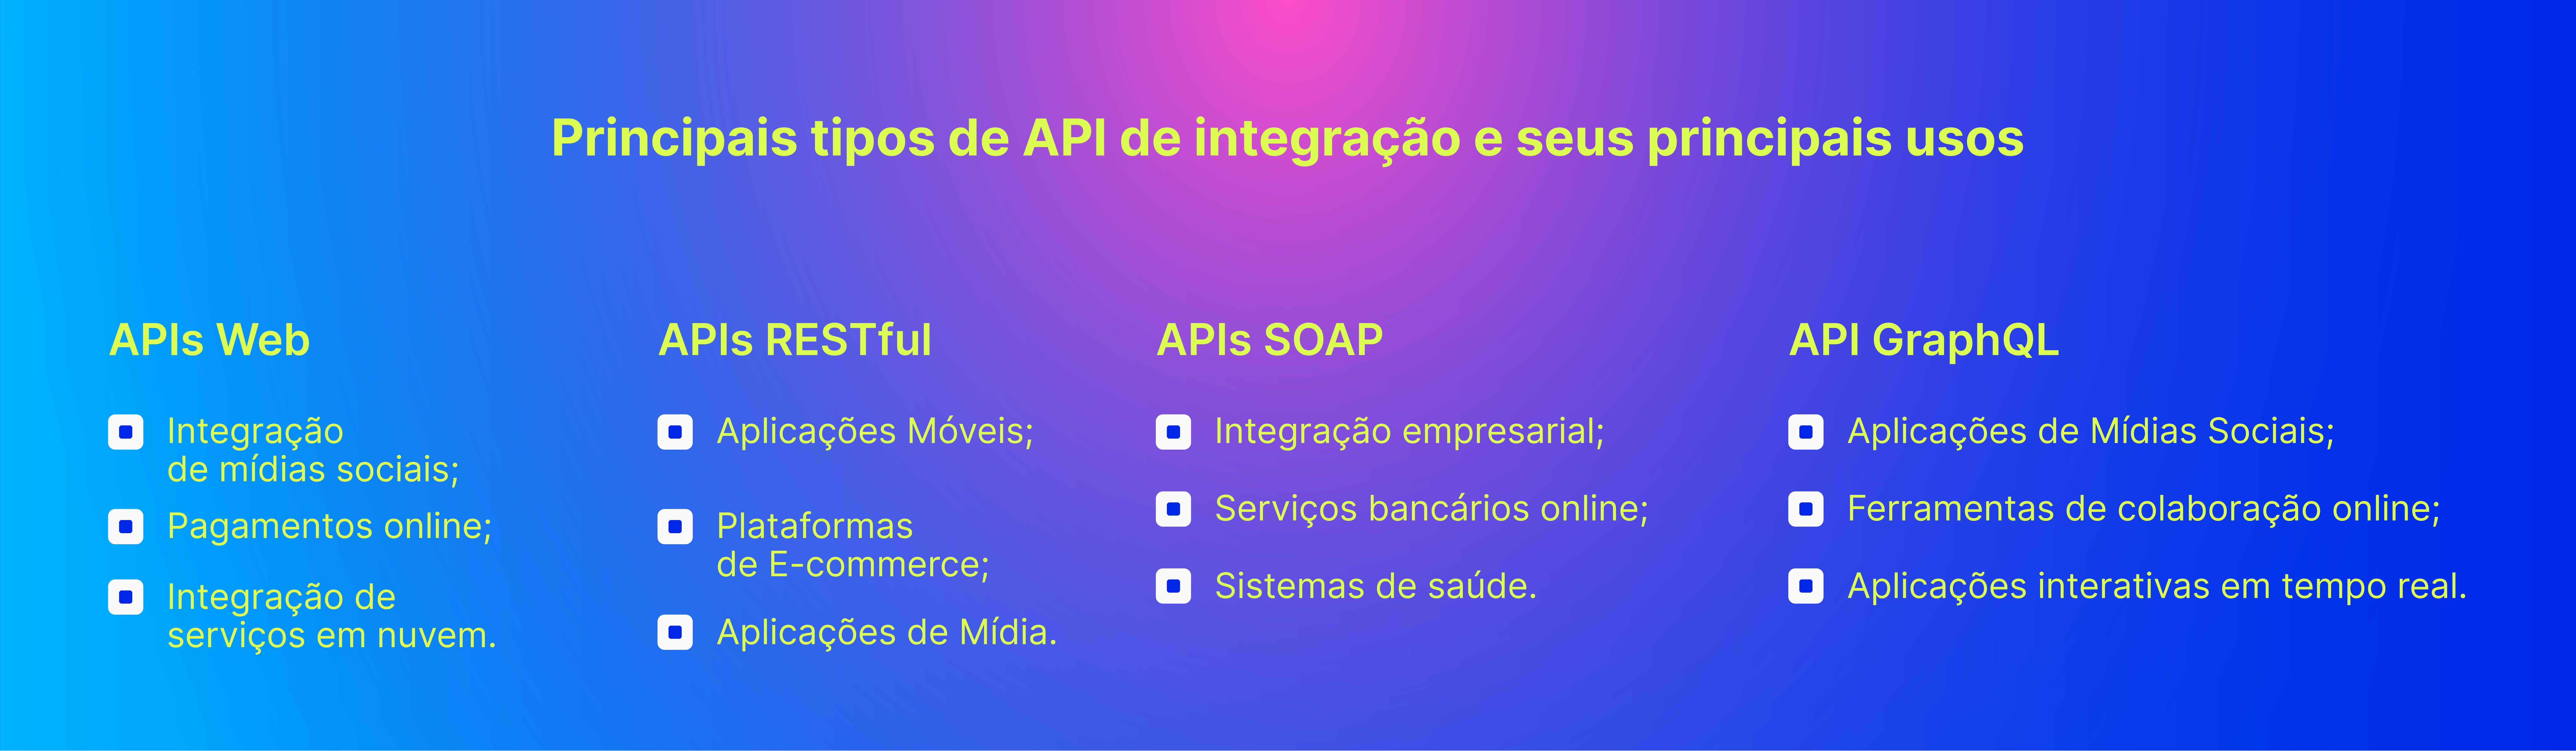 Main types of integration API and their main uses